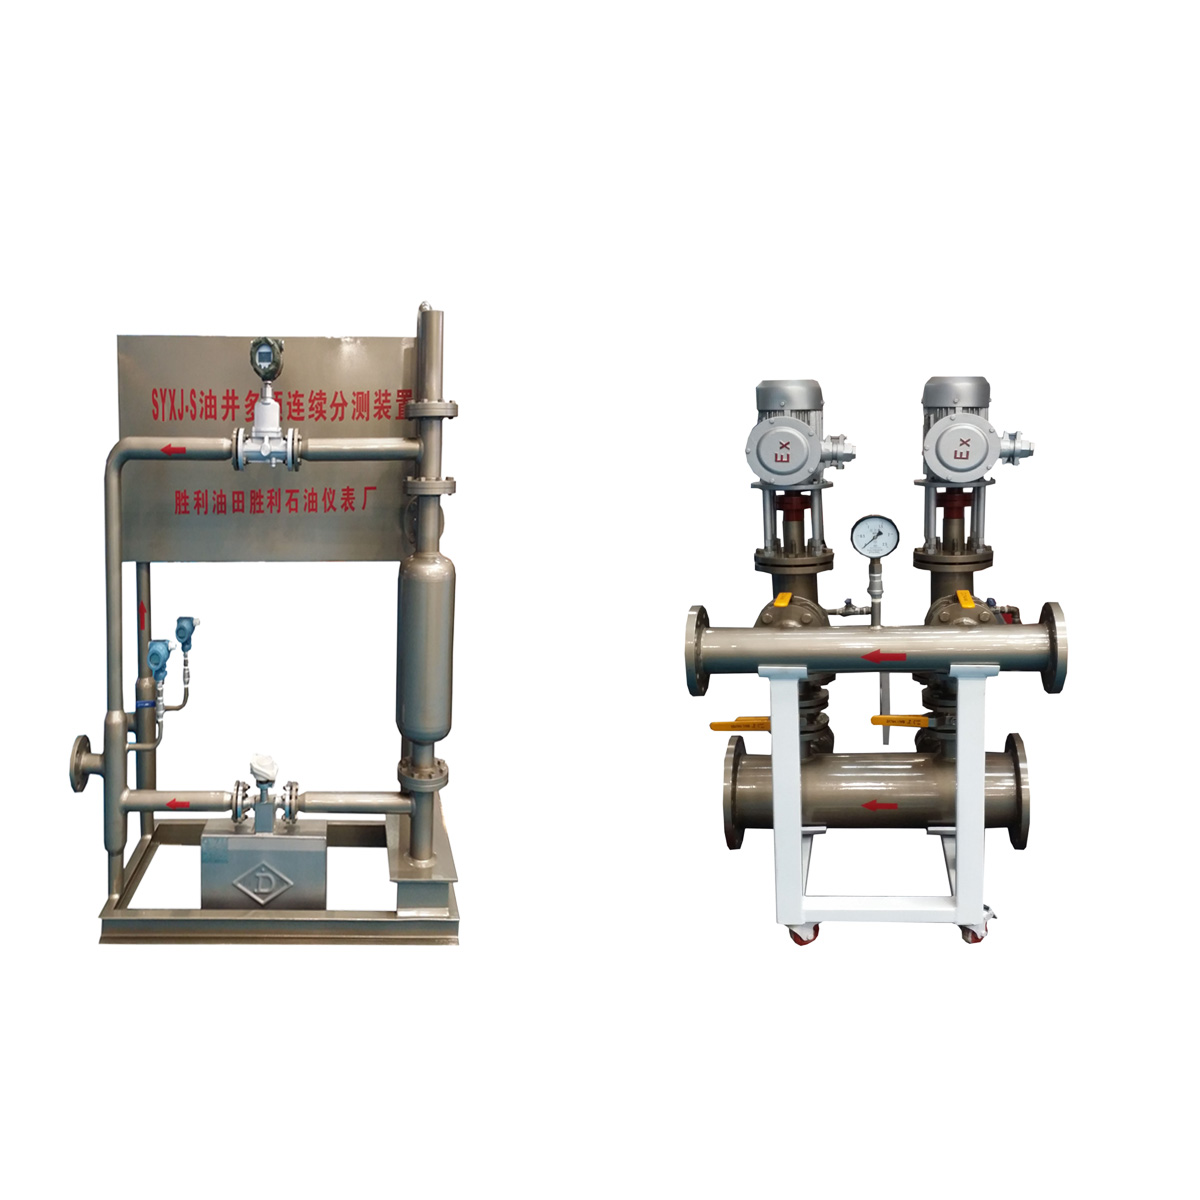 Oil and gas continuous metering device in metering plant